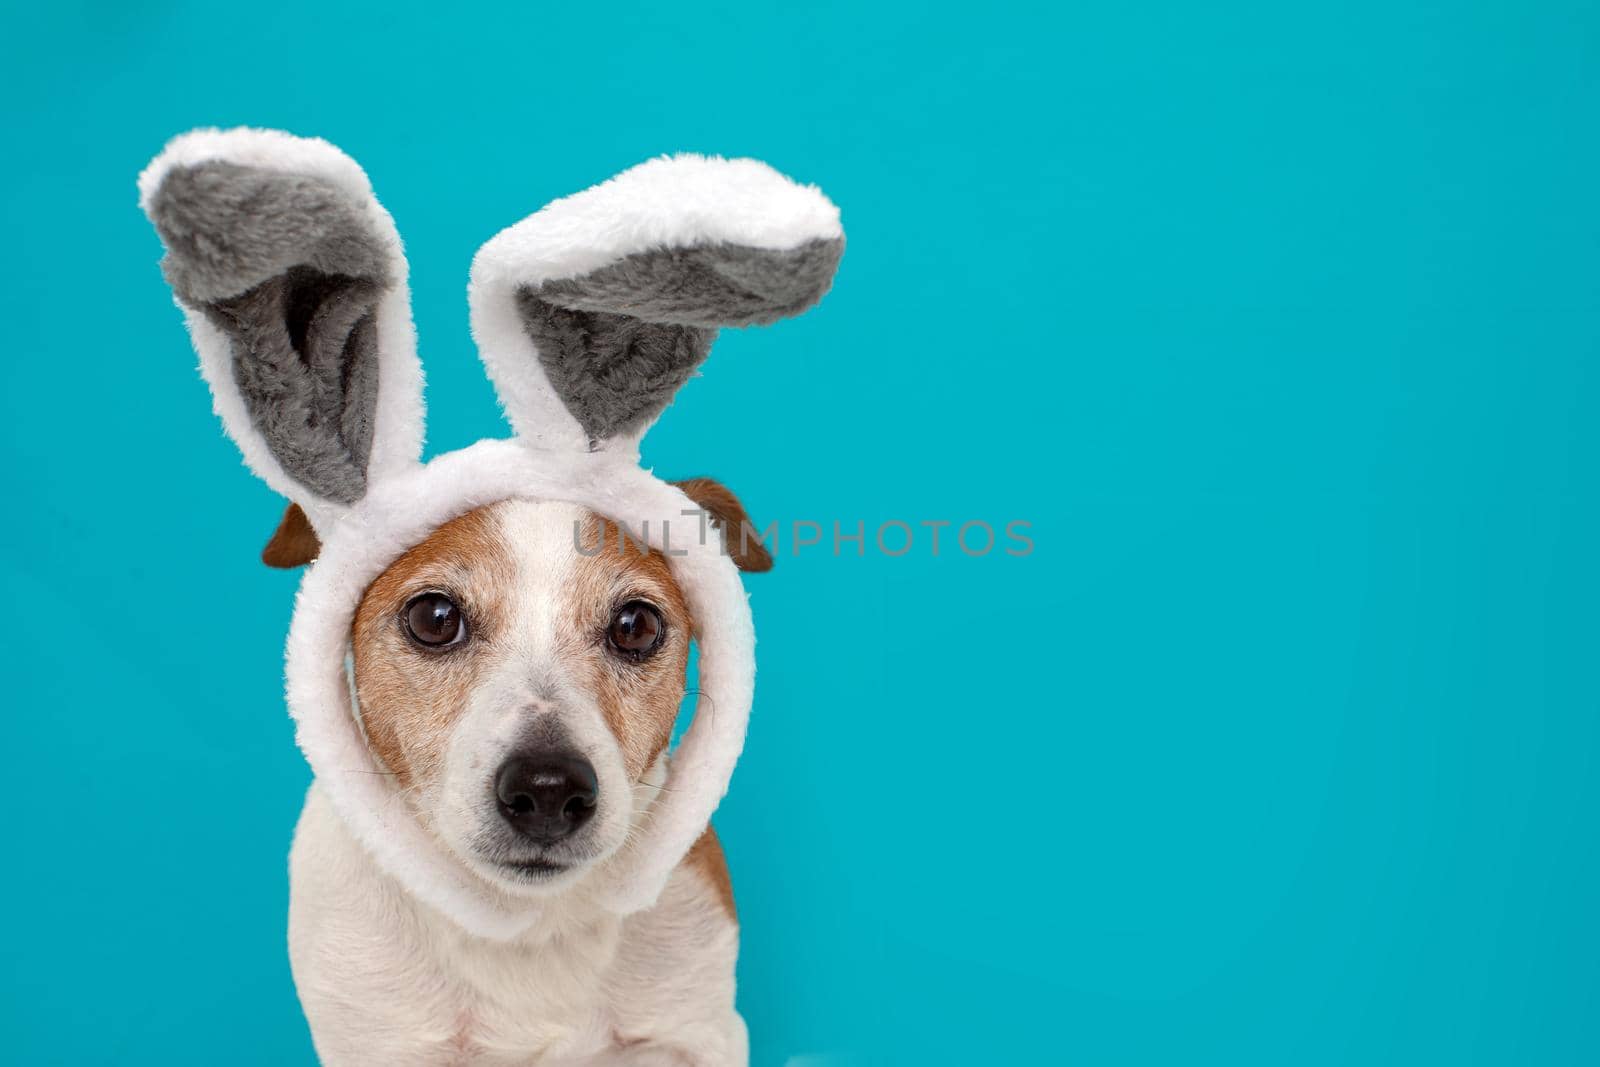 Frightened dog with rabbit ears by Demkat